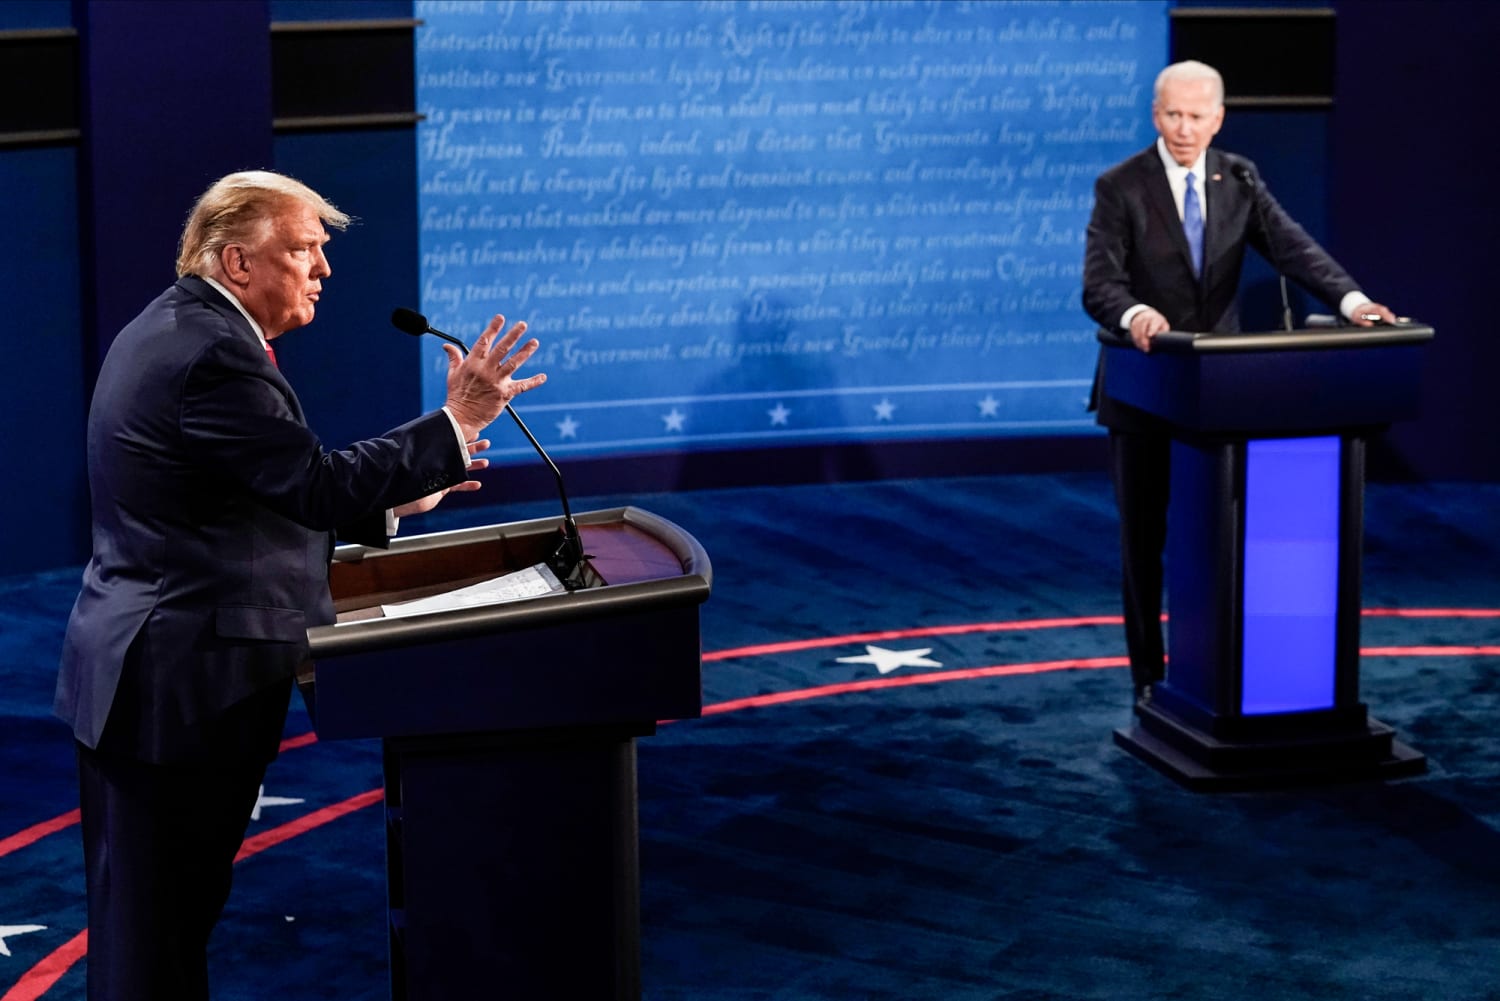 After persistent pressure from Donald Trump's presidential campaign and allies, the anticipation of a face-off between the former POTUS and President Joe Biden on the debate stage is growing as the most critical election of our time looms.